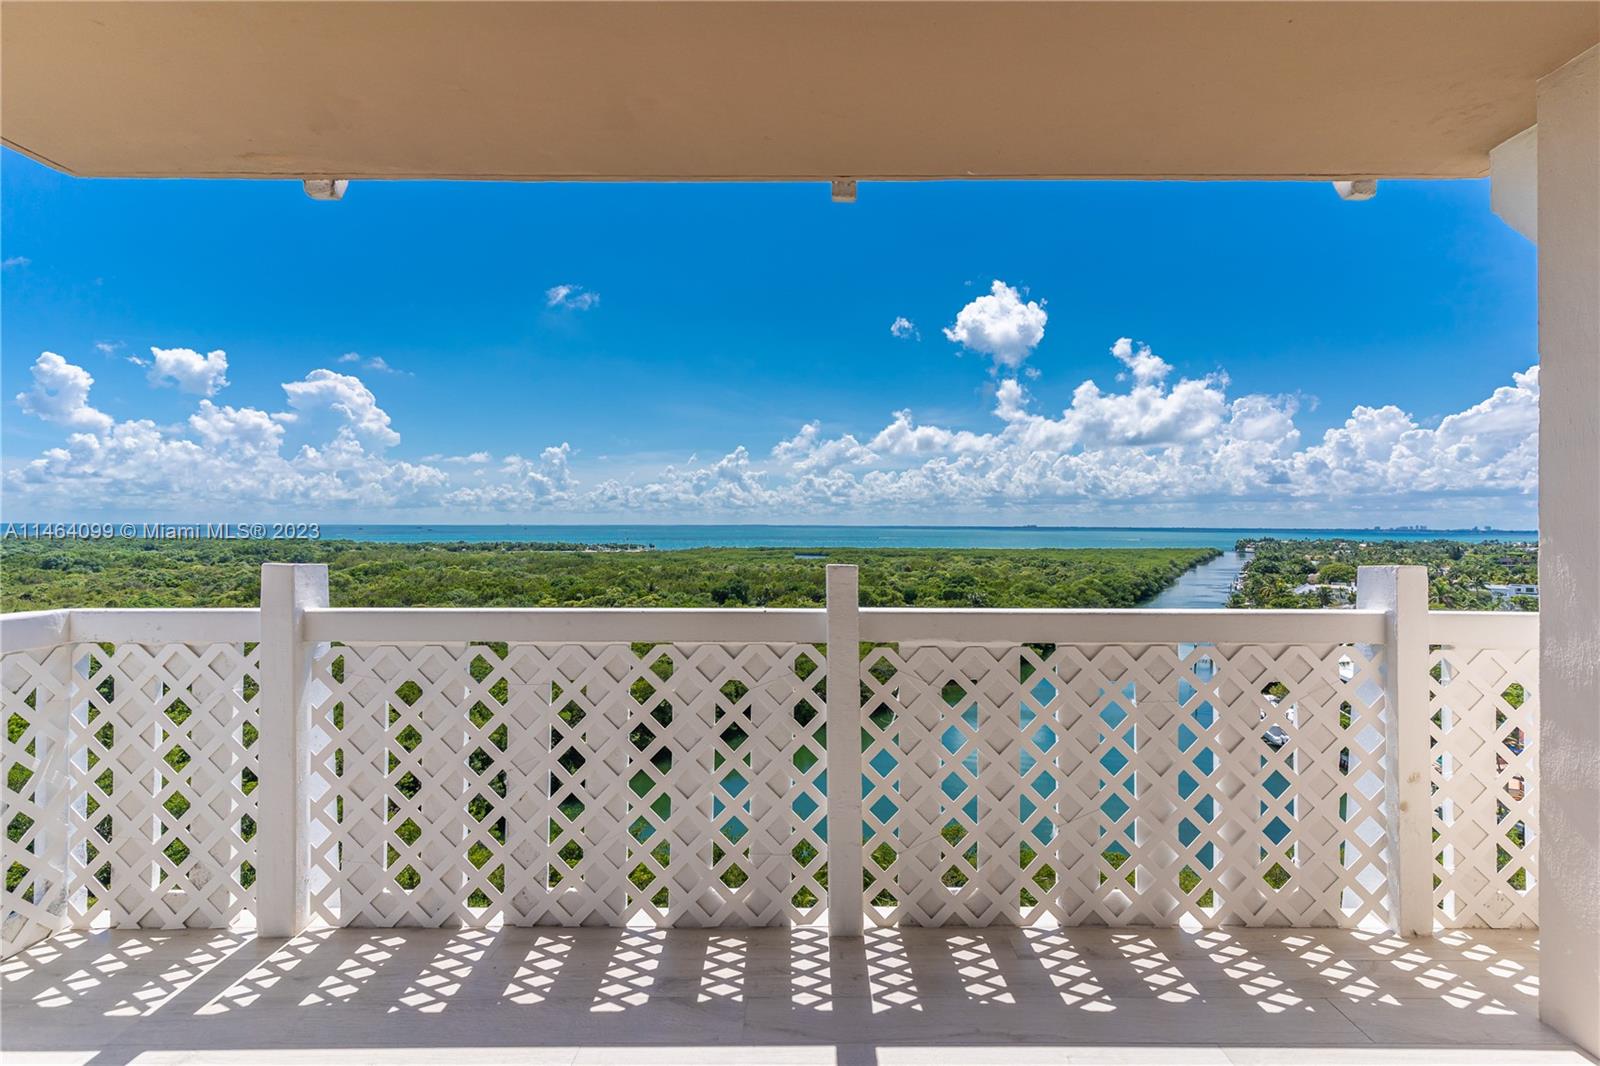 Pre-Penthouse Corner Unit, located in one of Key Biscayne's Most Coveted Boutique Buildings with Direct Beach Access. This updated unit, renovated in 2019, boasts modern ceramic flooring throughout the entire apartment. Enjoy breathtaking views of the water, the nearby State Park, and the iconic Lighthouse from every room. The abundant natural light on the 11th floor truly stands out in this unit. With custom-made cabinets in every room, you benefit from a lot of storage. 
Offering private beach access, two pools, two tennis courts, three gyms, recreational rooms for kids, and even a hair and nail salon on-site, The Towers of Key Biscayne is a great place to live. Call today to set up your private tour !